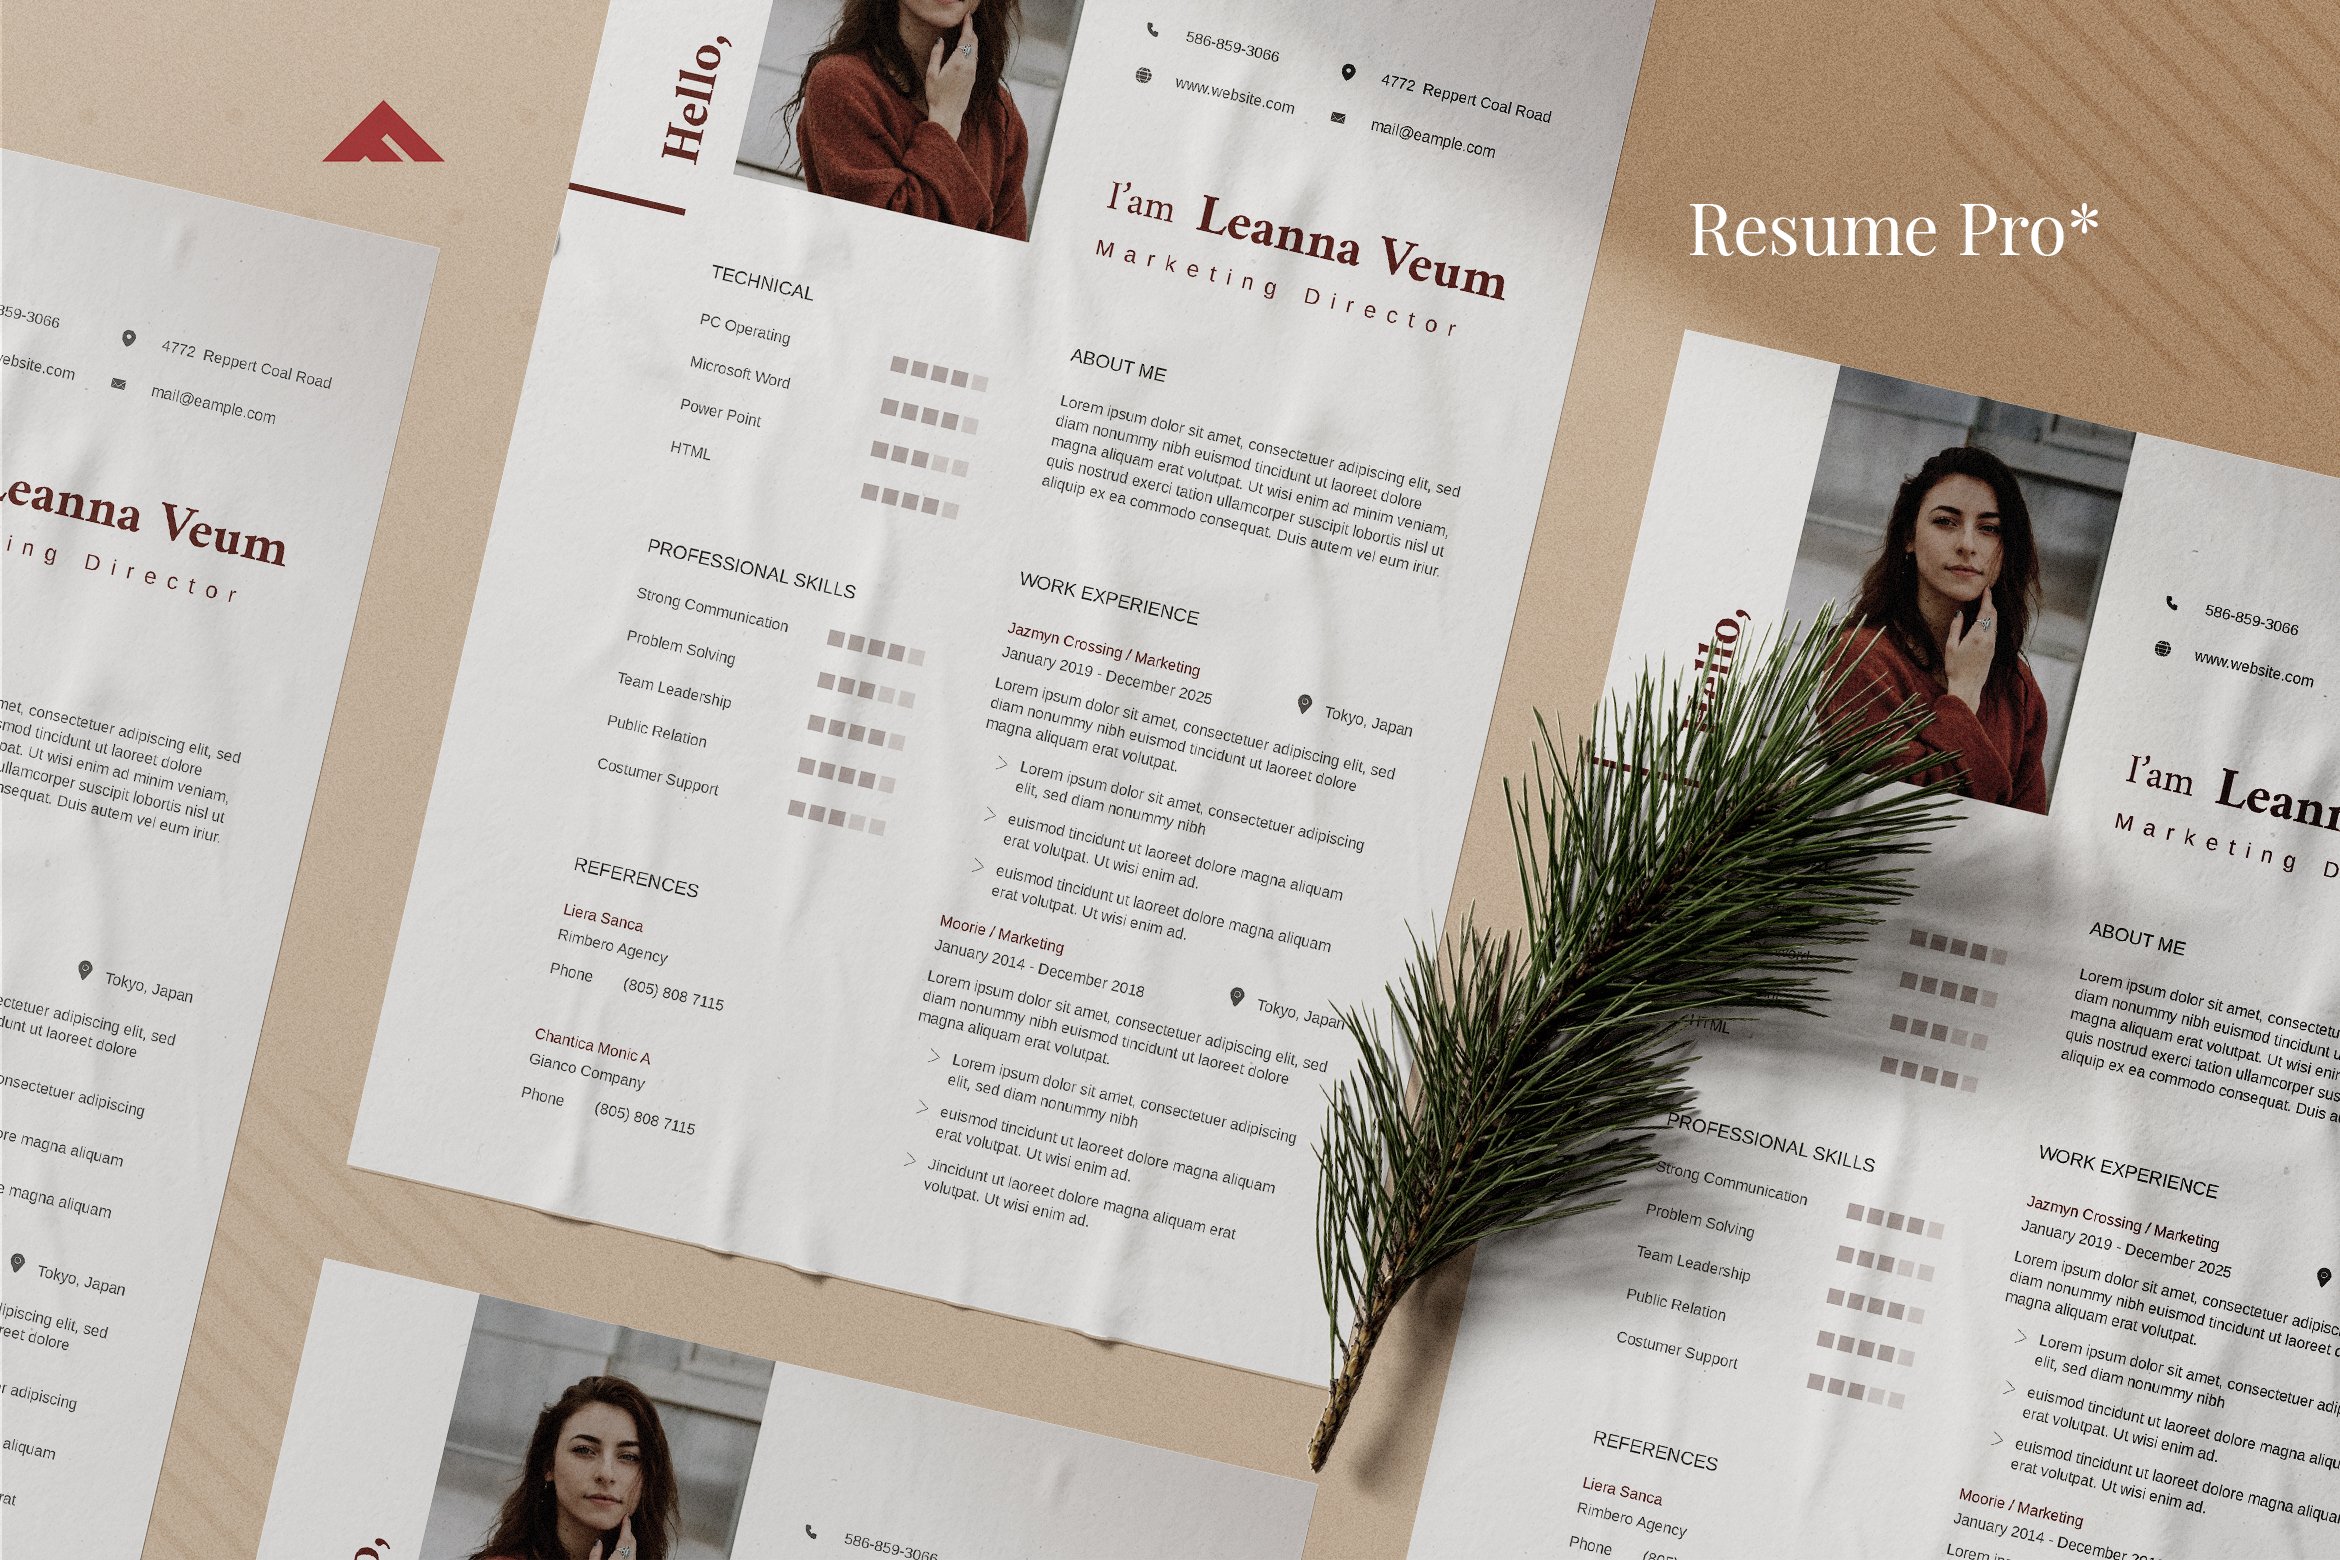 Marketing Resume Pro Template cover image.